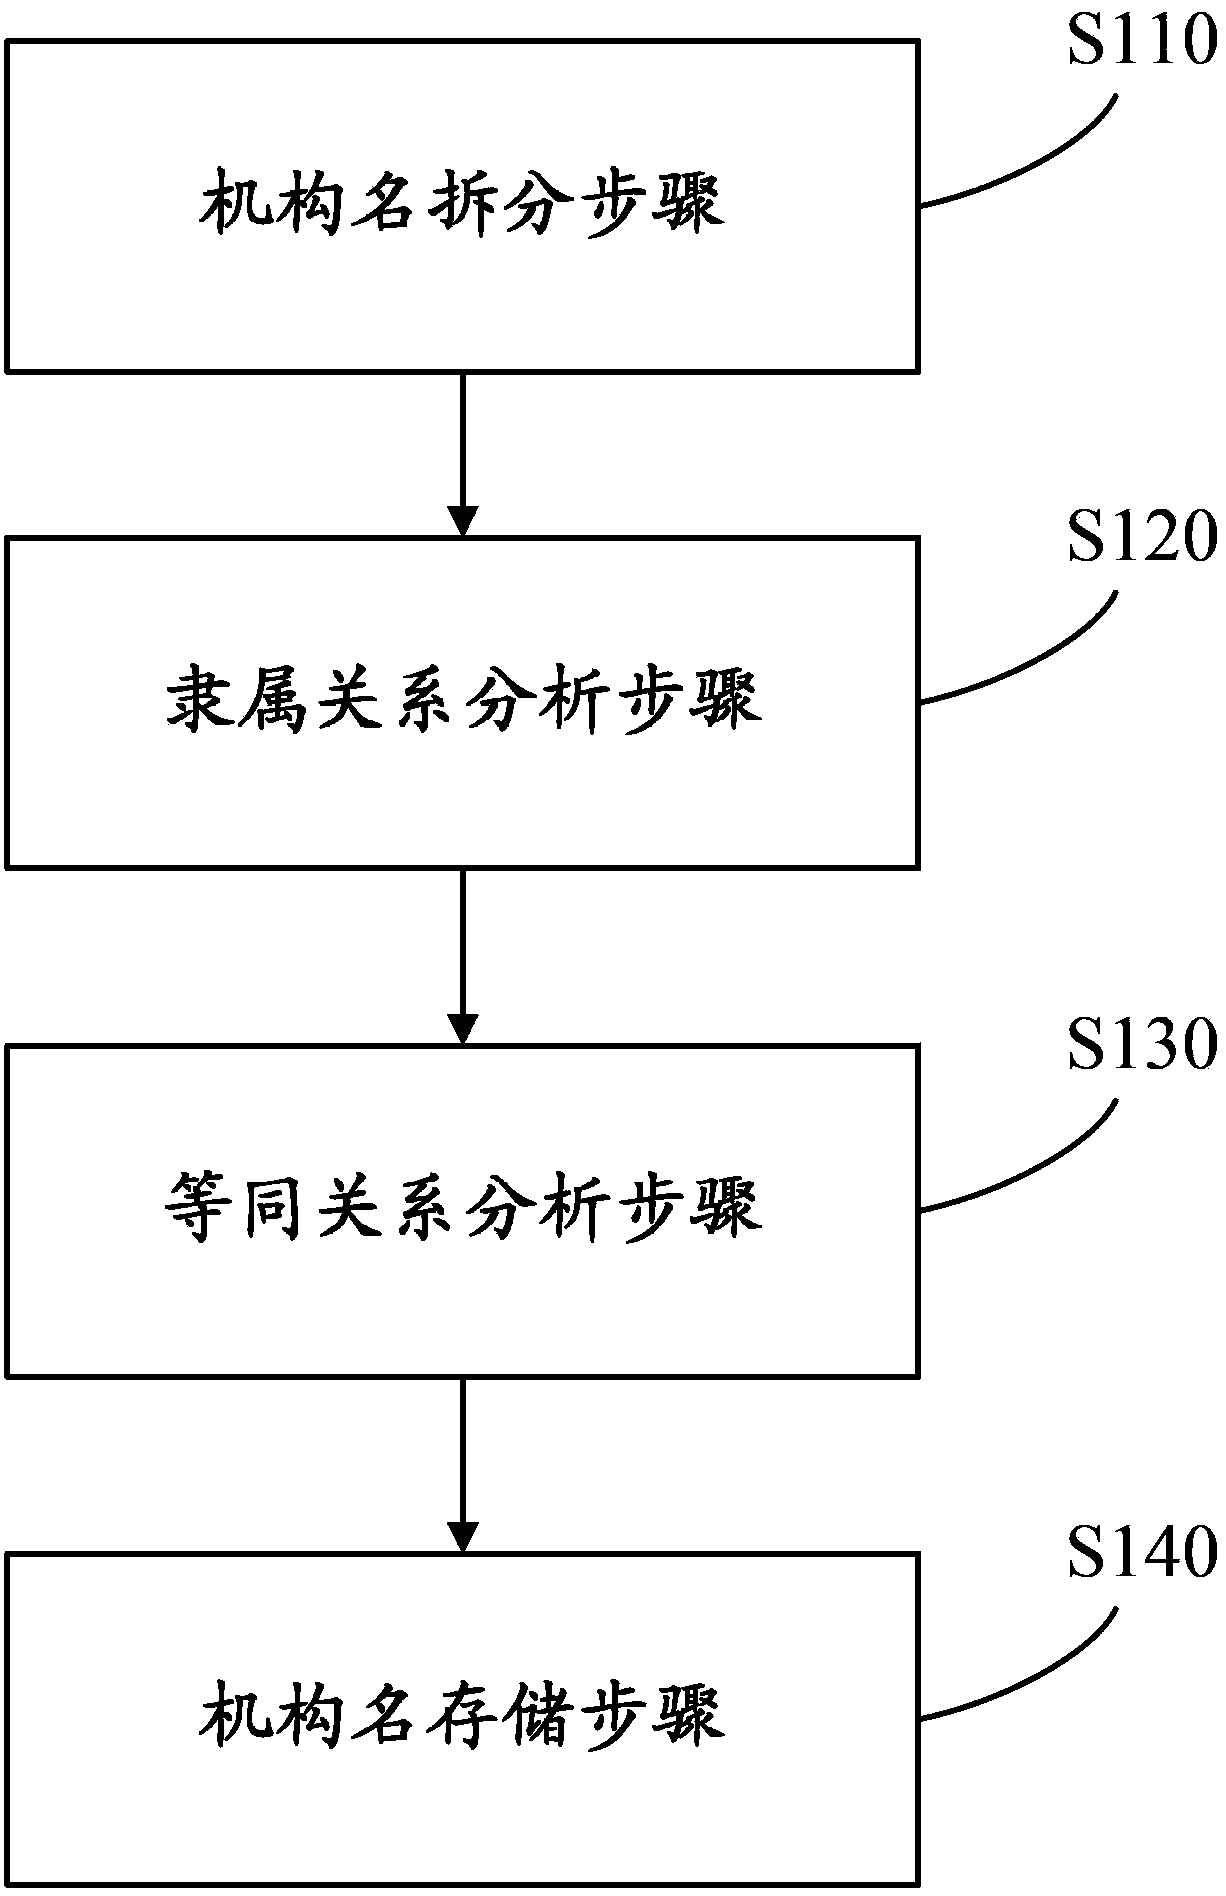 Information processing method and device and method and device for standardizing organization names